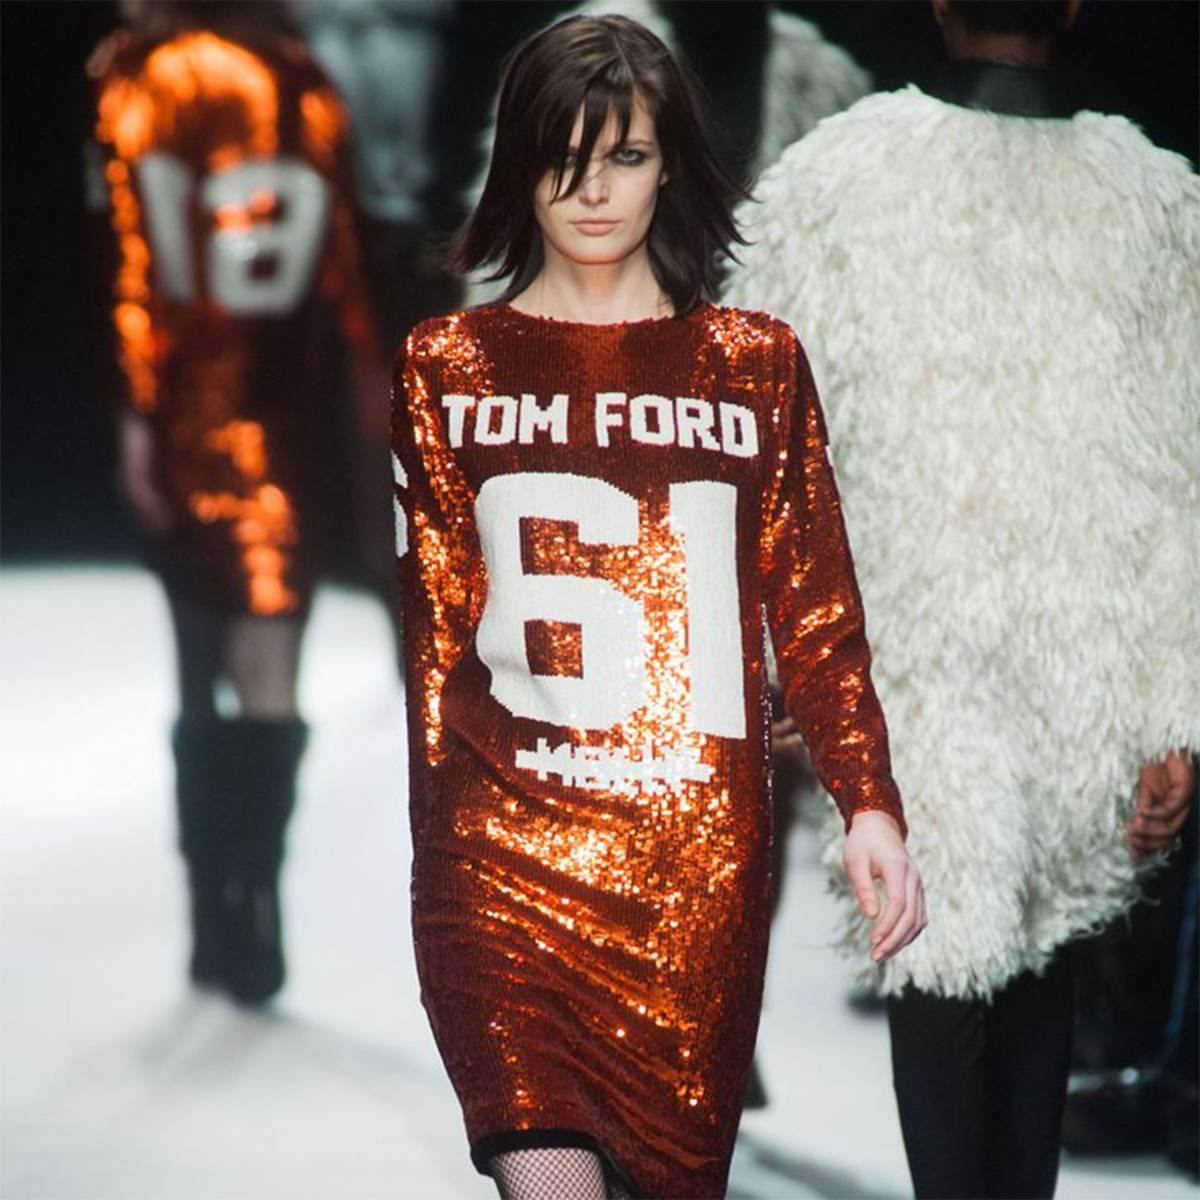 Tom Ford  sequin jersey dresses from of his SS14 collection.
The dress was designed as a tribute to Jay-Z and worn by Beyonce while on tour as a homage to Tom Ford.
This is exactly same dress as  the runway picture and color of the dress might look